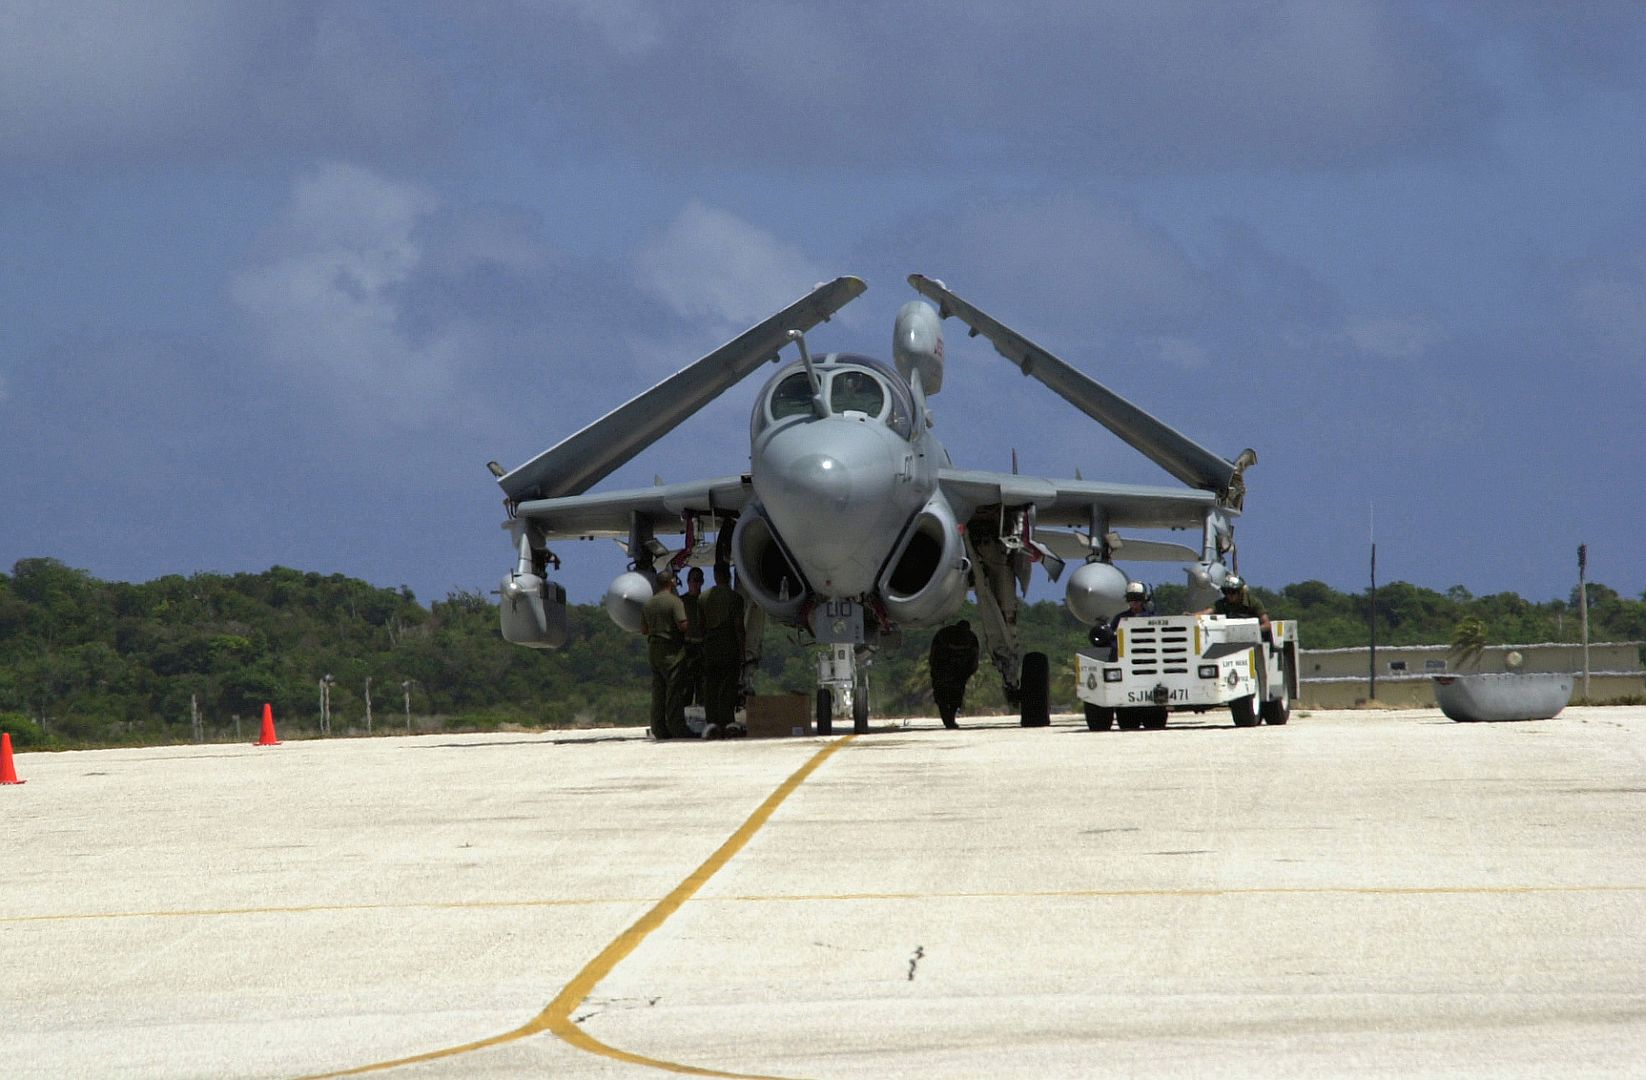 EA6B Prowler Assigned To The Marine Tactical Electronic Warfare Squadron 2 At Marine Corps Air Station Iwakuni Japan On Andersen Air Force Base Guam In Support Of Exercise COPE NORTH 2002 